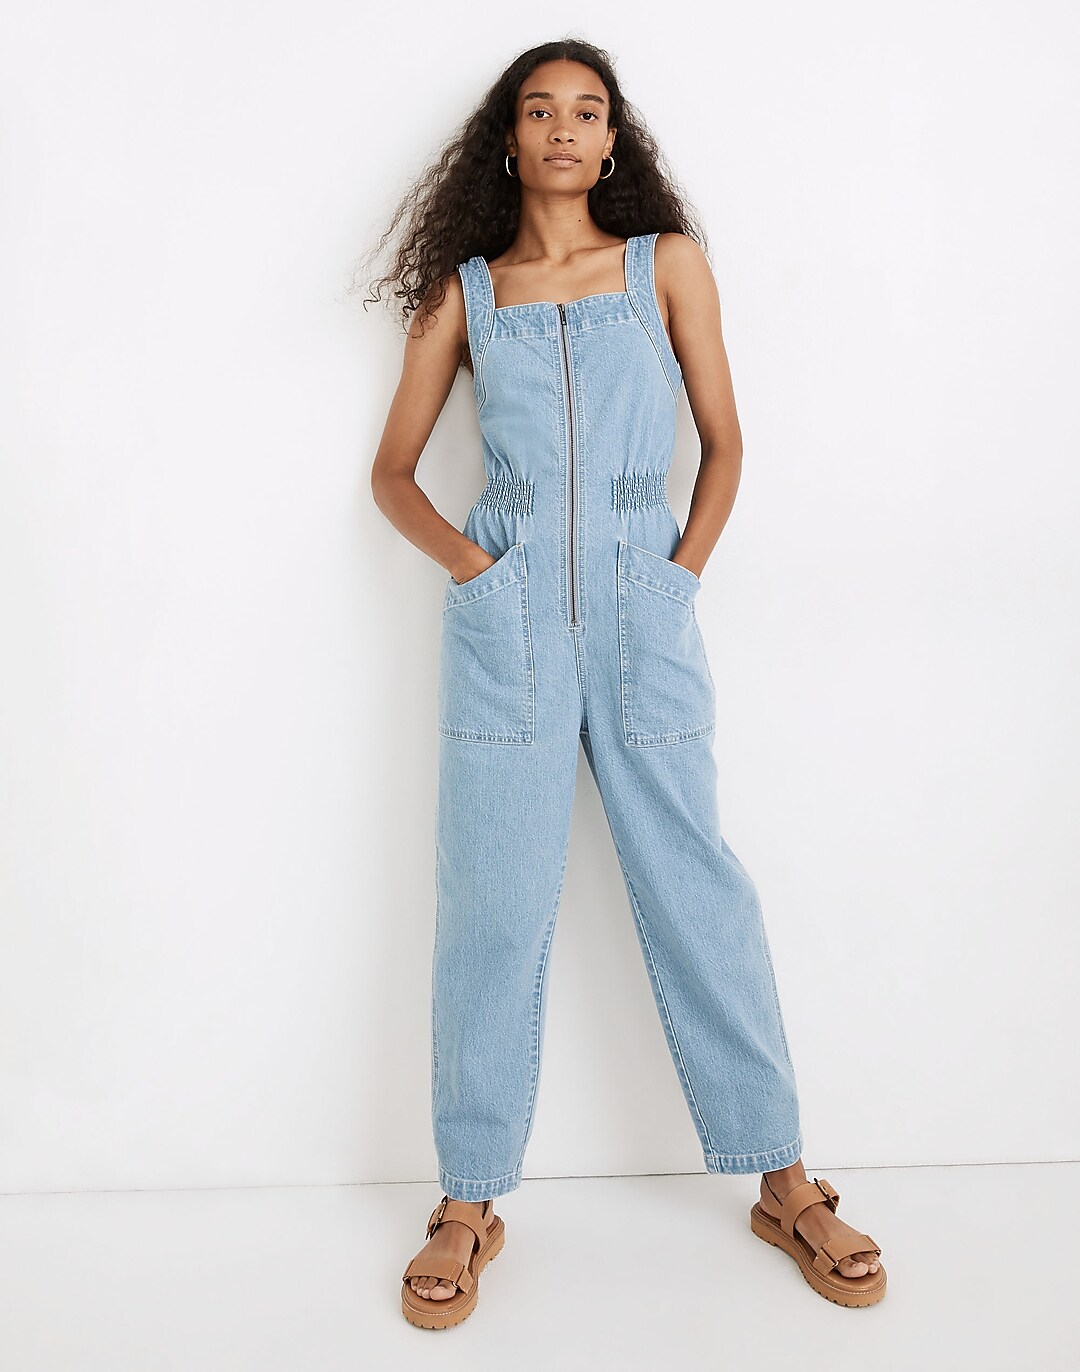 Alysi Bonded-Seams Washed Denim Dungarees - ShopStyle Jumpsuits & Rompers